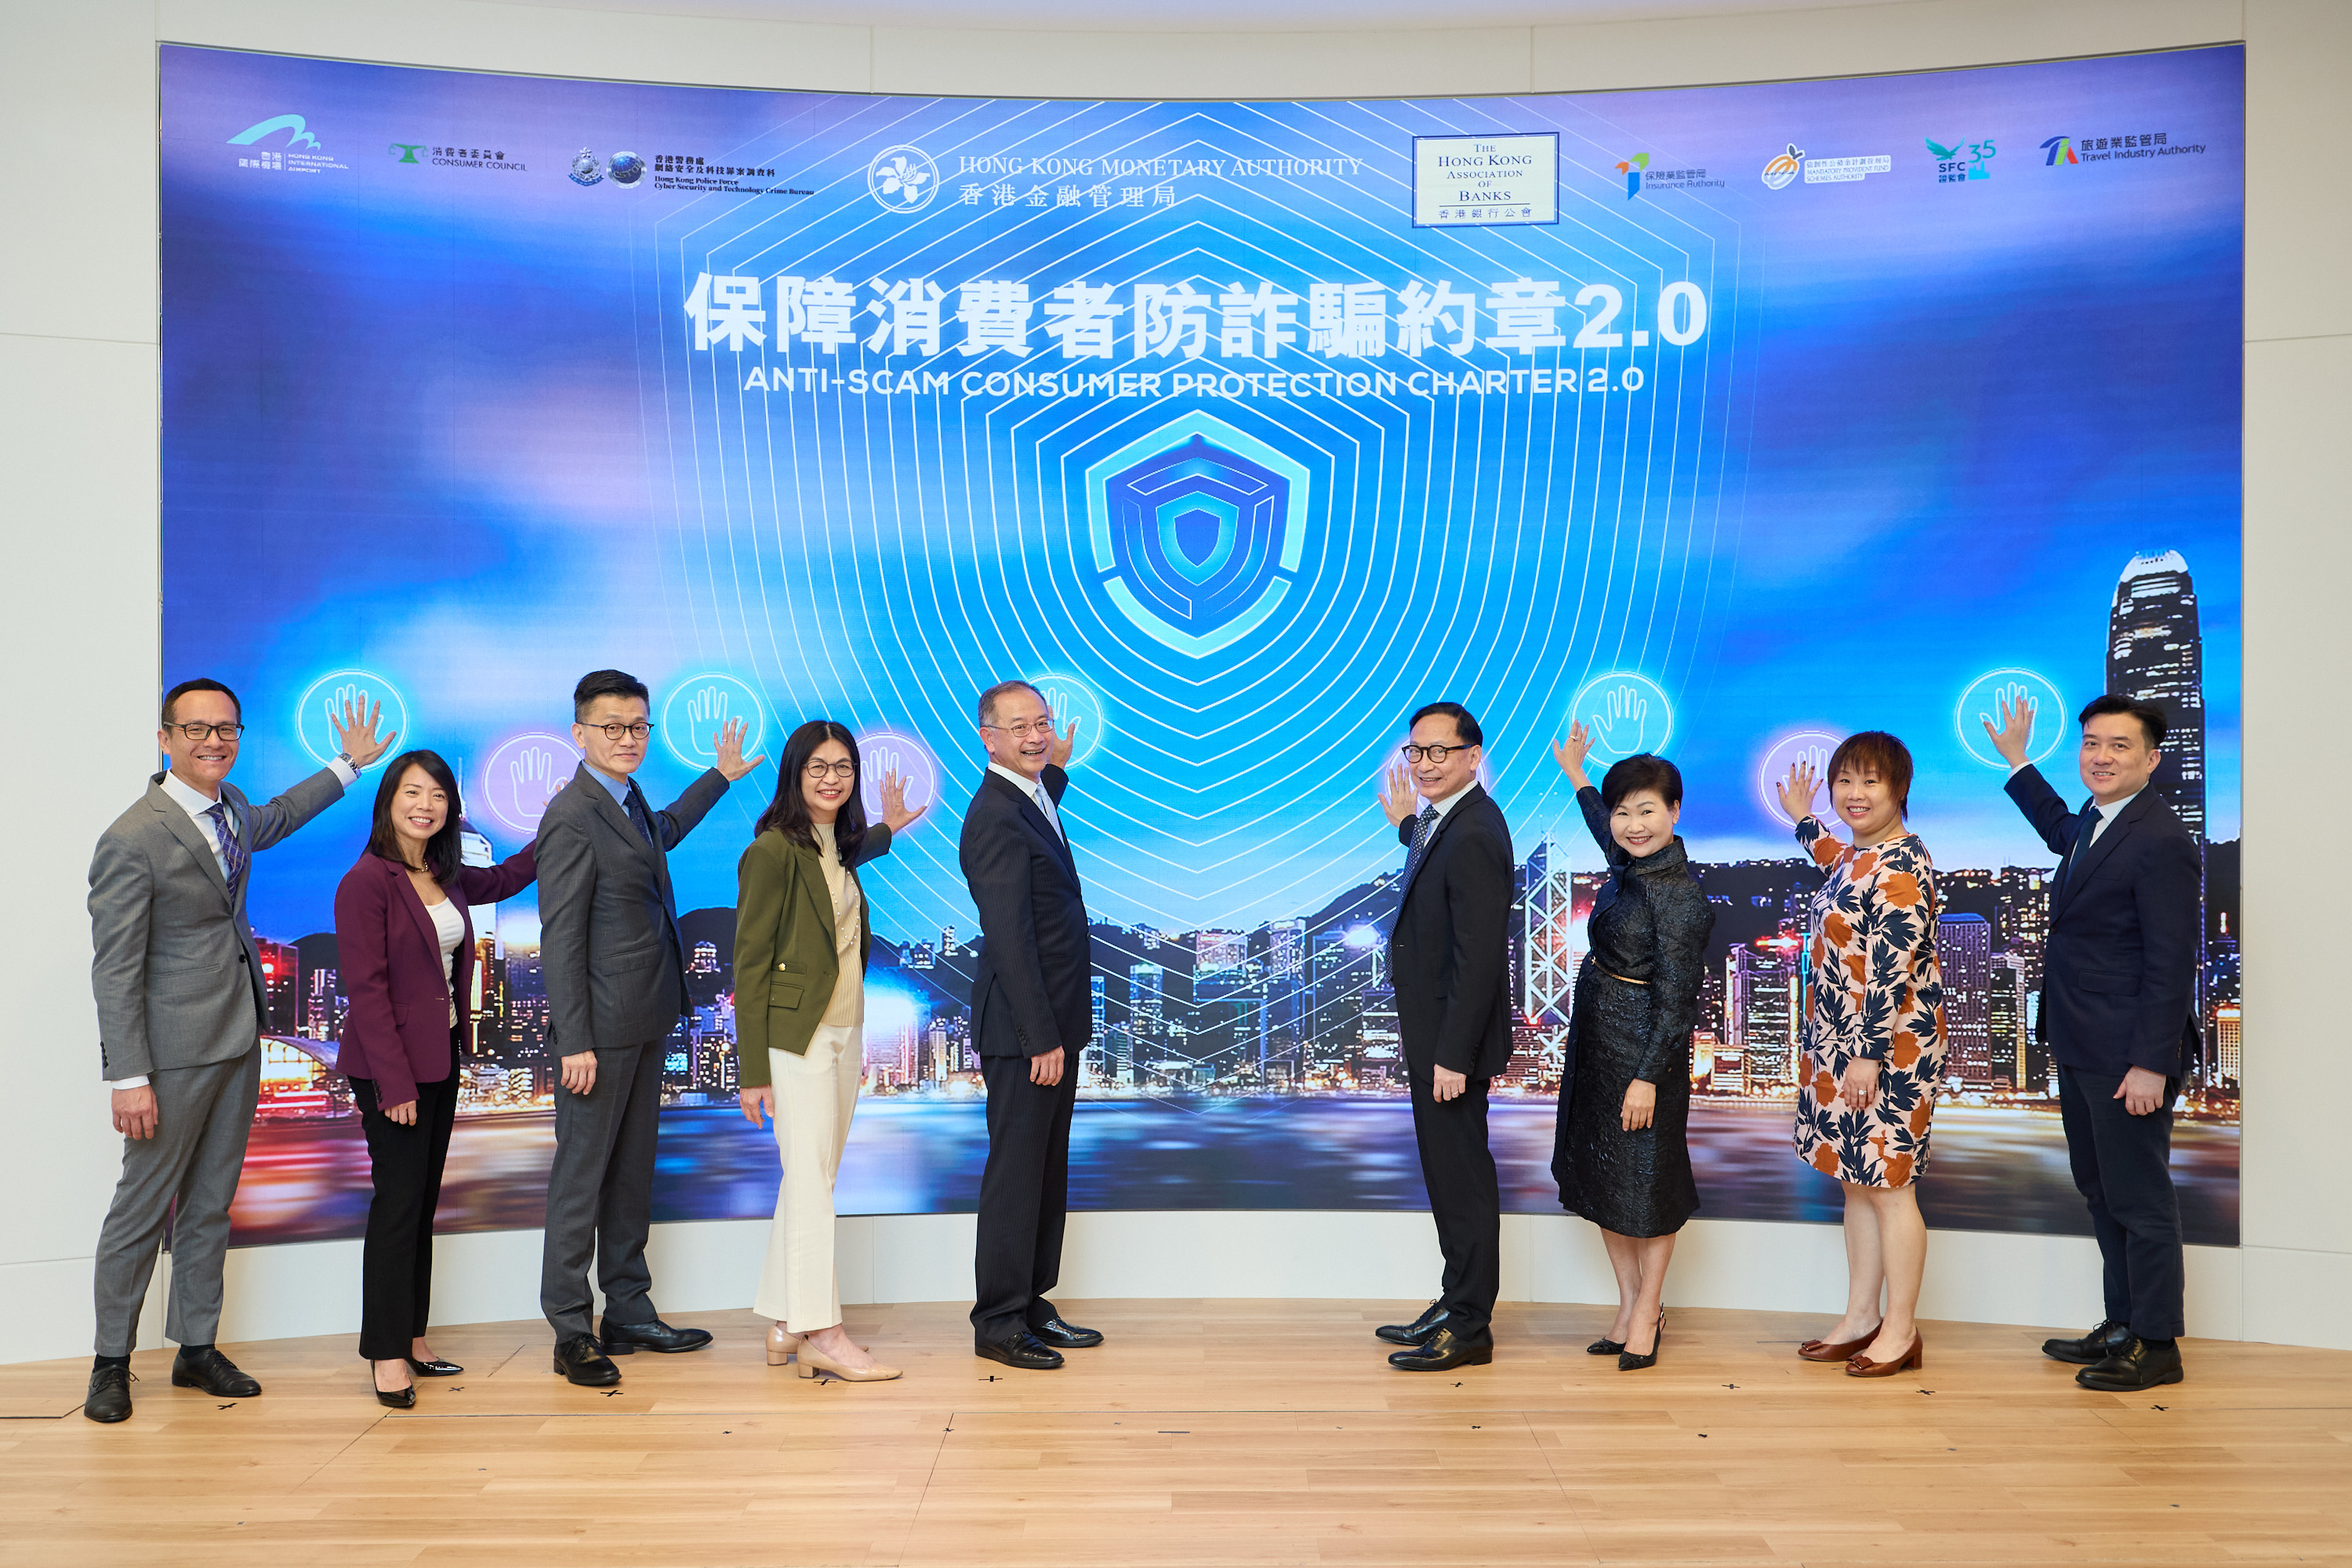 Mr Eddie Yue, Chief Executive of the Hong Kong Monetary Authority (fifth from left); Ms Luanne Lim, Chairman of the Hong Kong Association of Banks and Chief Executive Officer, Hong Kong, HSBC (second from left); Mr Julian Lee, Executive Director of Finance of the Airport Authority (ninth from left); Ms Gilly Wong, Chief Executive of the Consumer Council (seventh from left); Mr Raymond Lam, Chief Superintendent of Police of the Cyber Security & Technology Crime Bureau of the Hong Kong Police Force (first from left); Mr Clement Cheung, Chief Executive Officer of the Insurance Authority (sixth from left); Mr Cheng Yan-chee, Managing Director of the Mandatory Provident Fund Schemes Authority (third from left); Ms Julia Leung, Chief Executive Officer of the Securities and Futures Commission (fourth from left); Ms Venus Wu, Director of Corporate Services of the Travel Industry Authority (eighth from left) participate in the ceremony of the Anti-Scam Consumer Protection Charter 2.0 event, symbolising the joint efforts of different sectors to help the public to guard against credit card scams and other digital frauds.